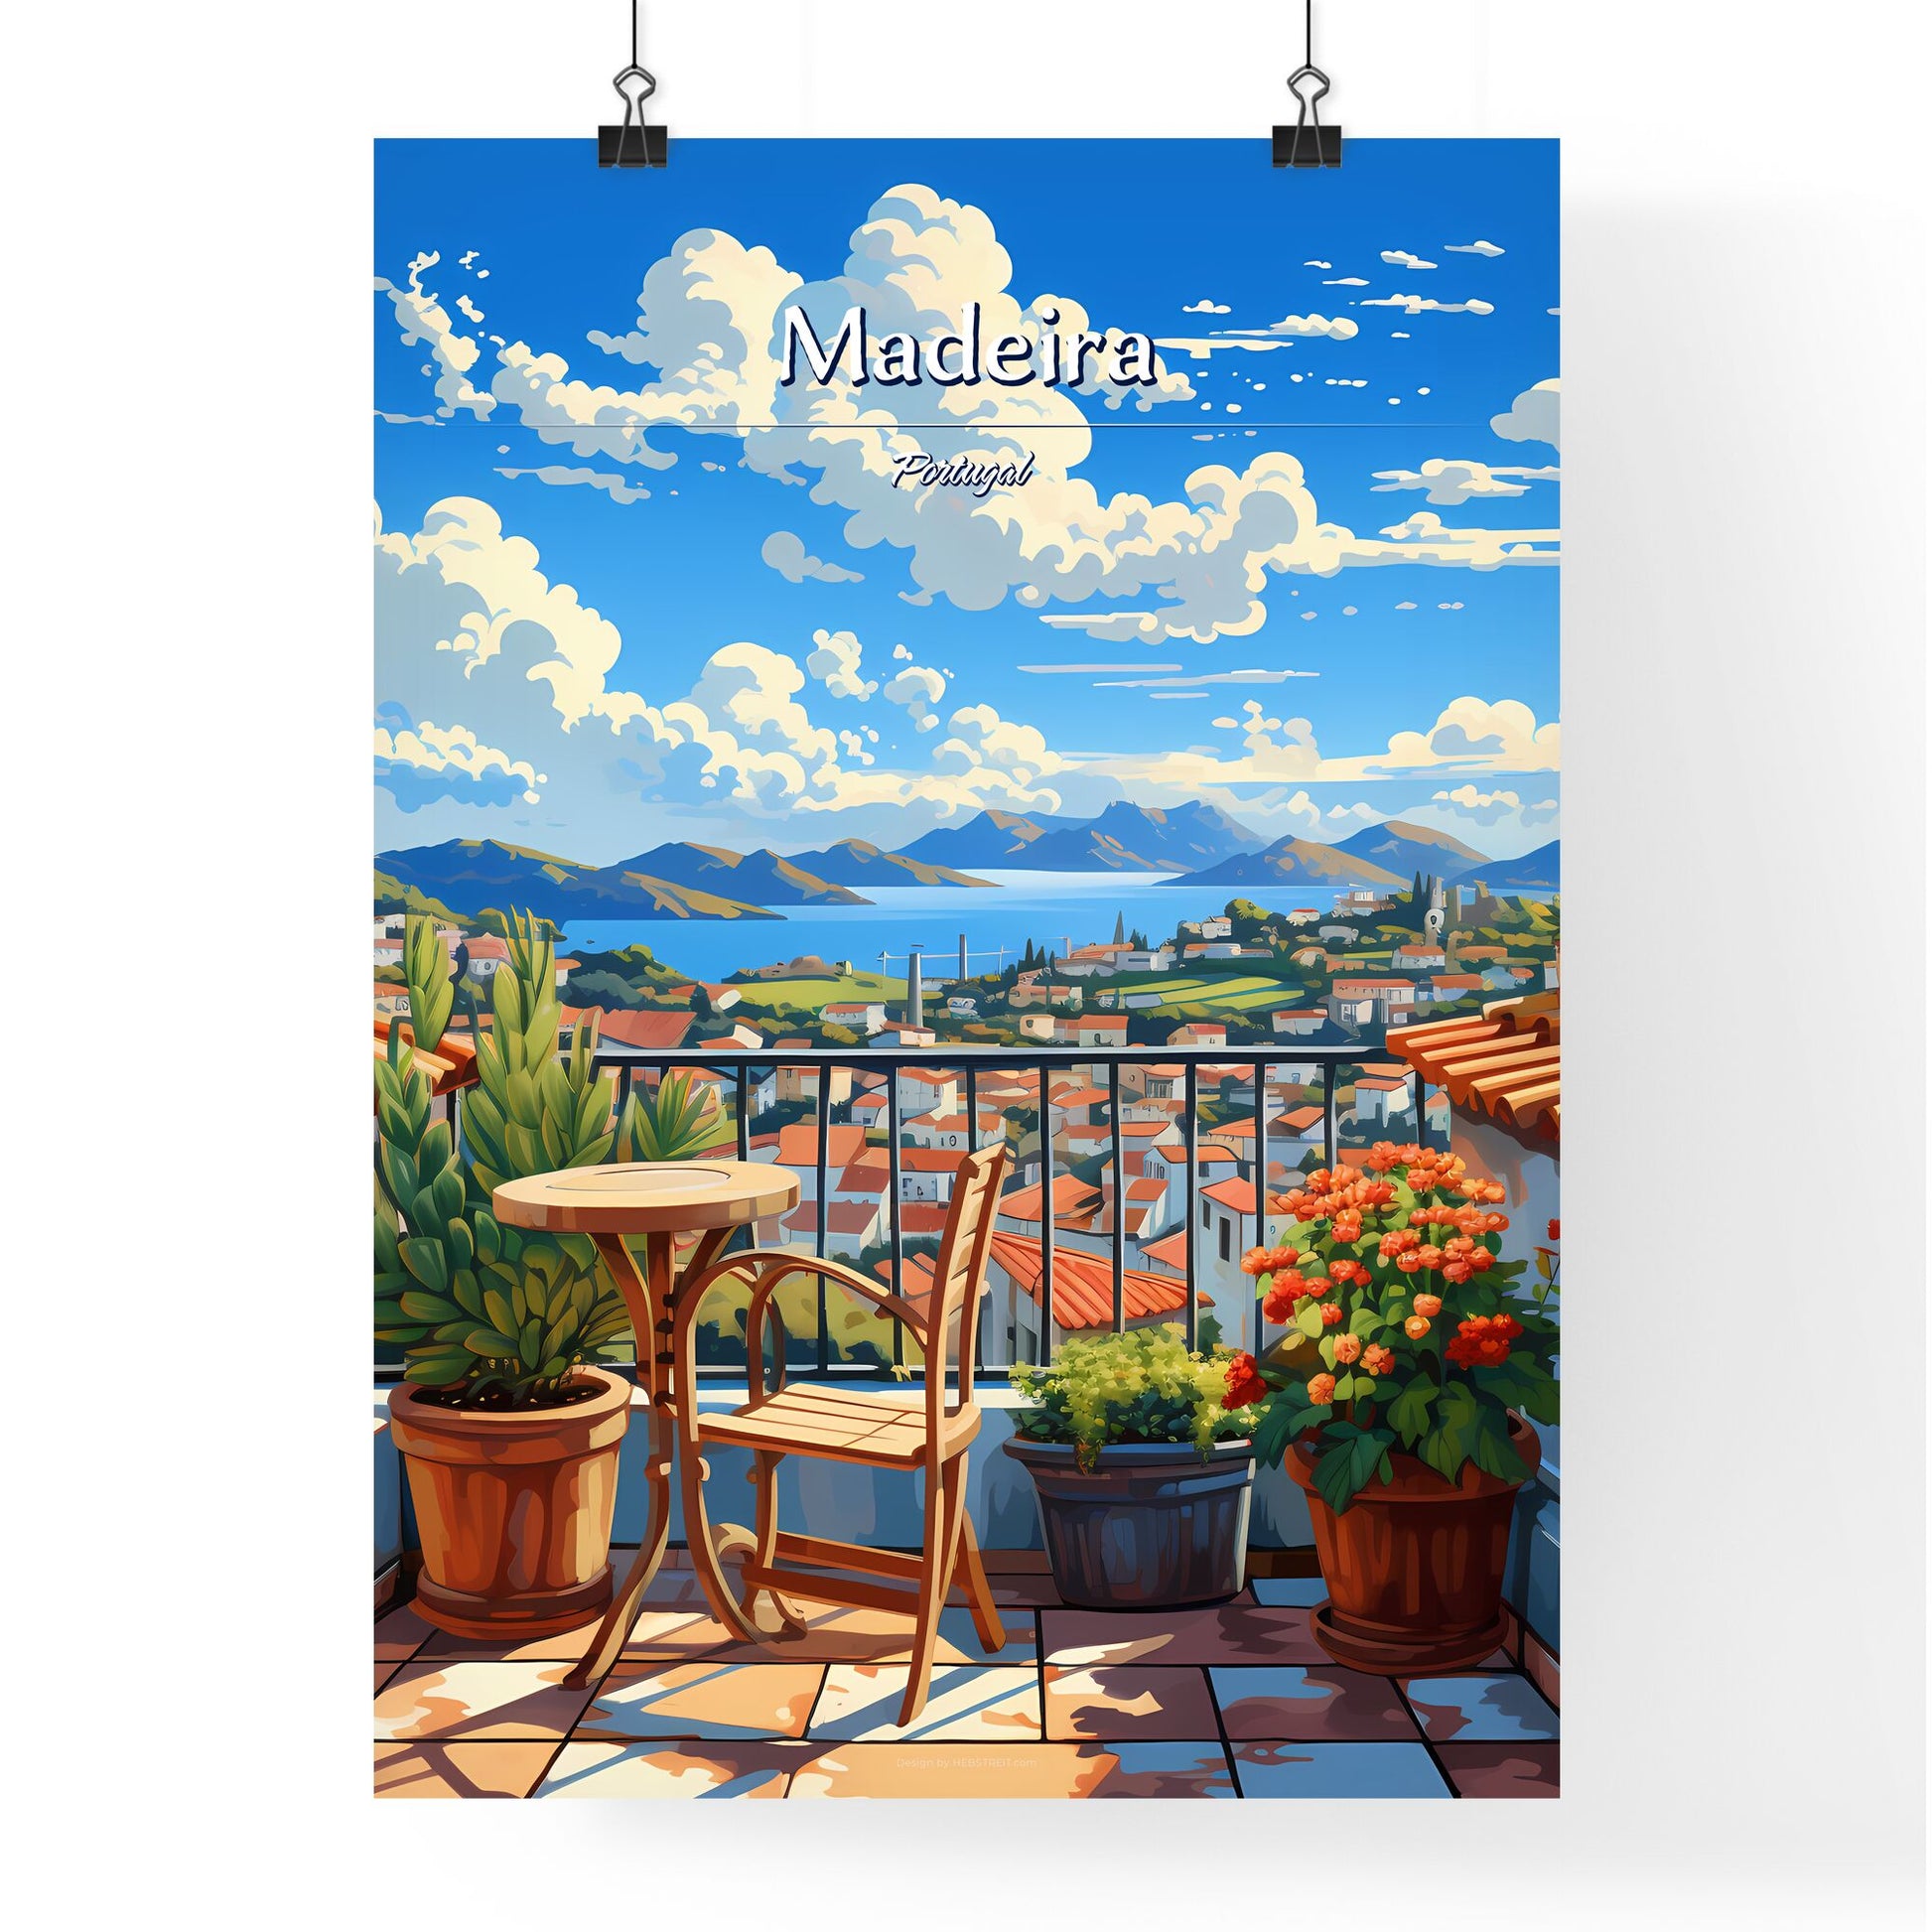 On the roofs of Madeira, Portugal - Art print of a balcony with a view of a town and mountains Default Title